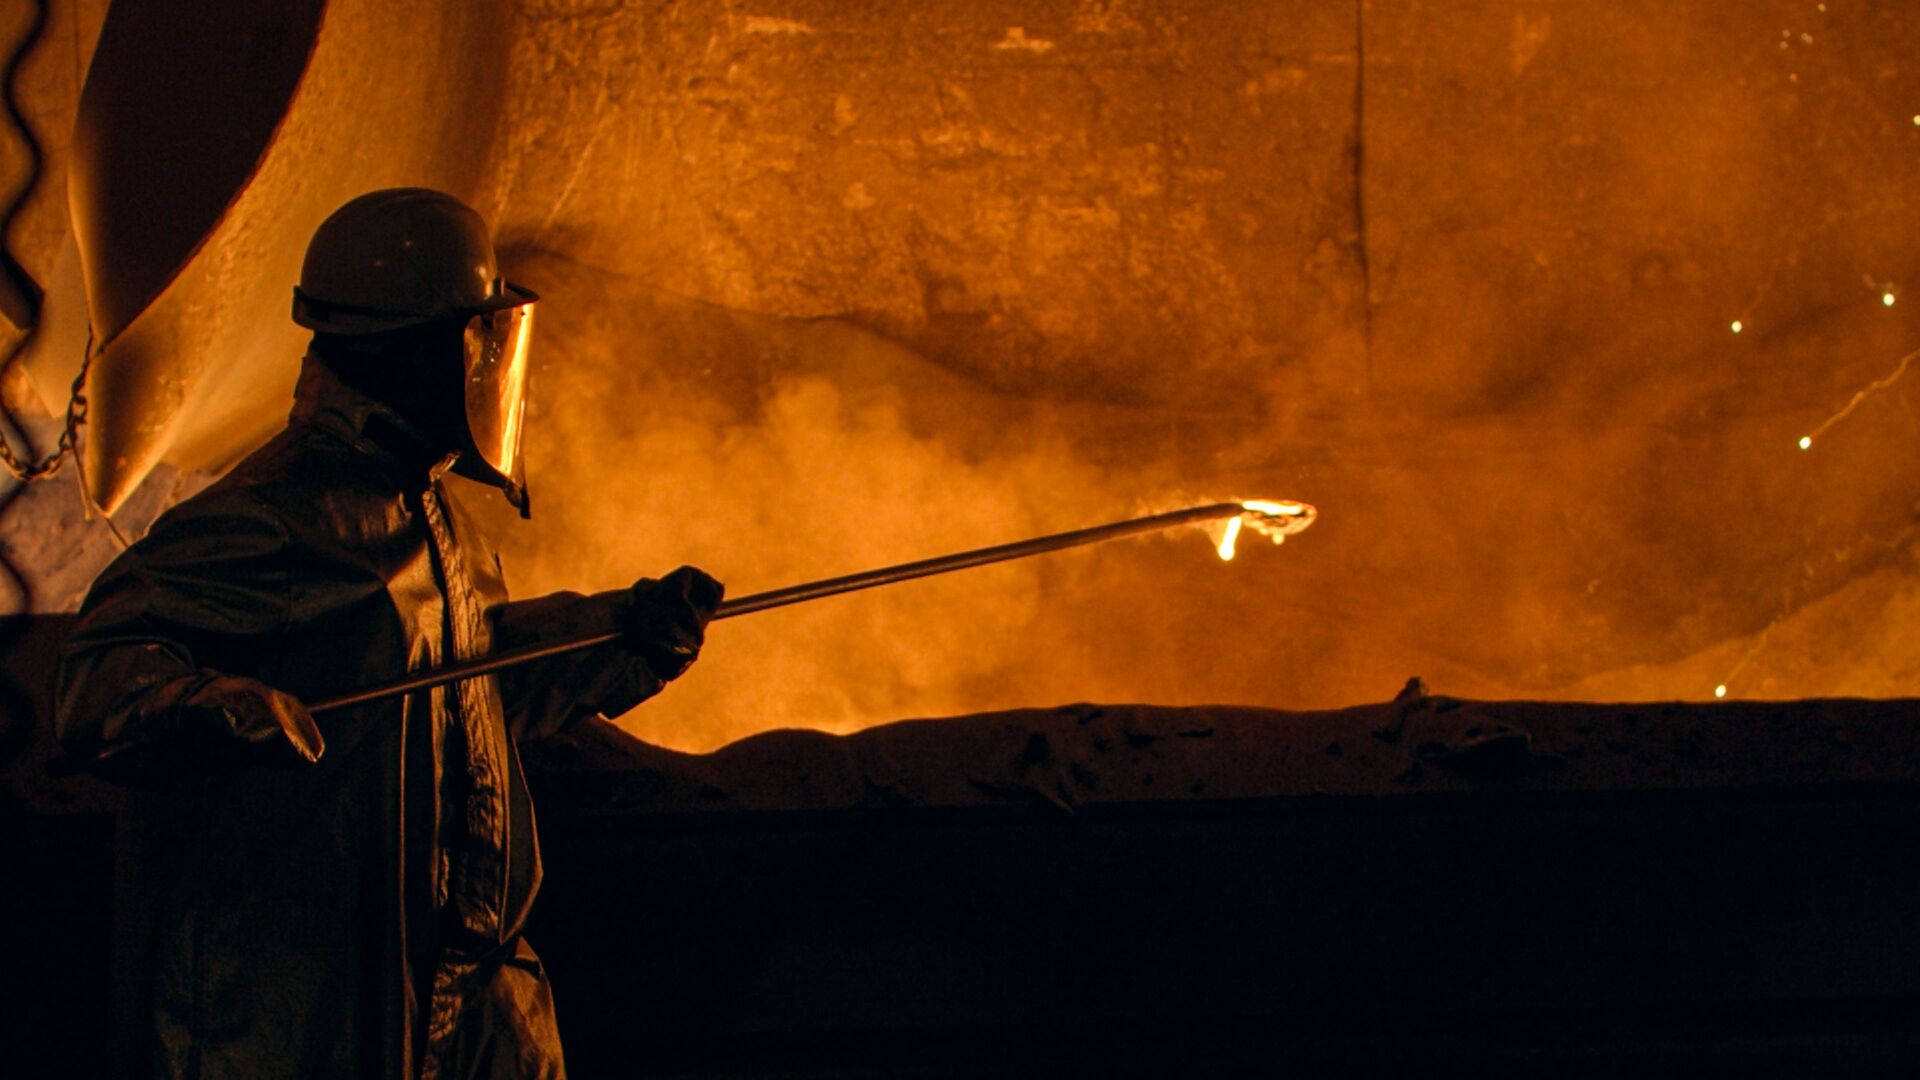 Person wearing heavy protective clothing works with casting in a smelter.